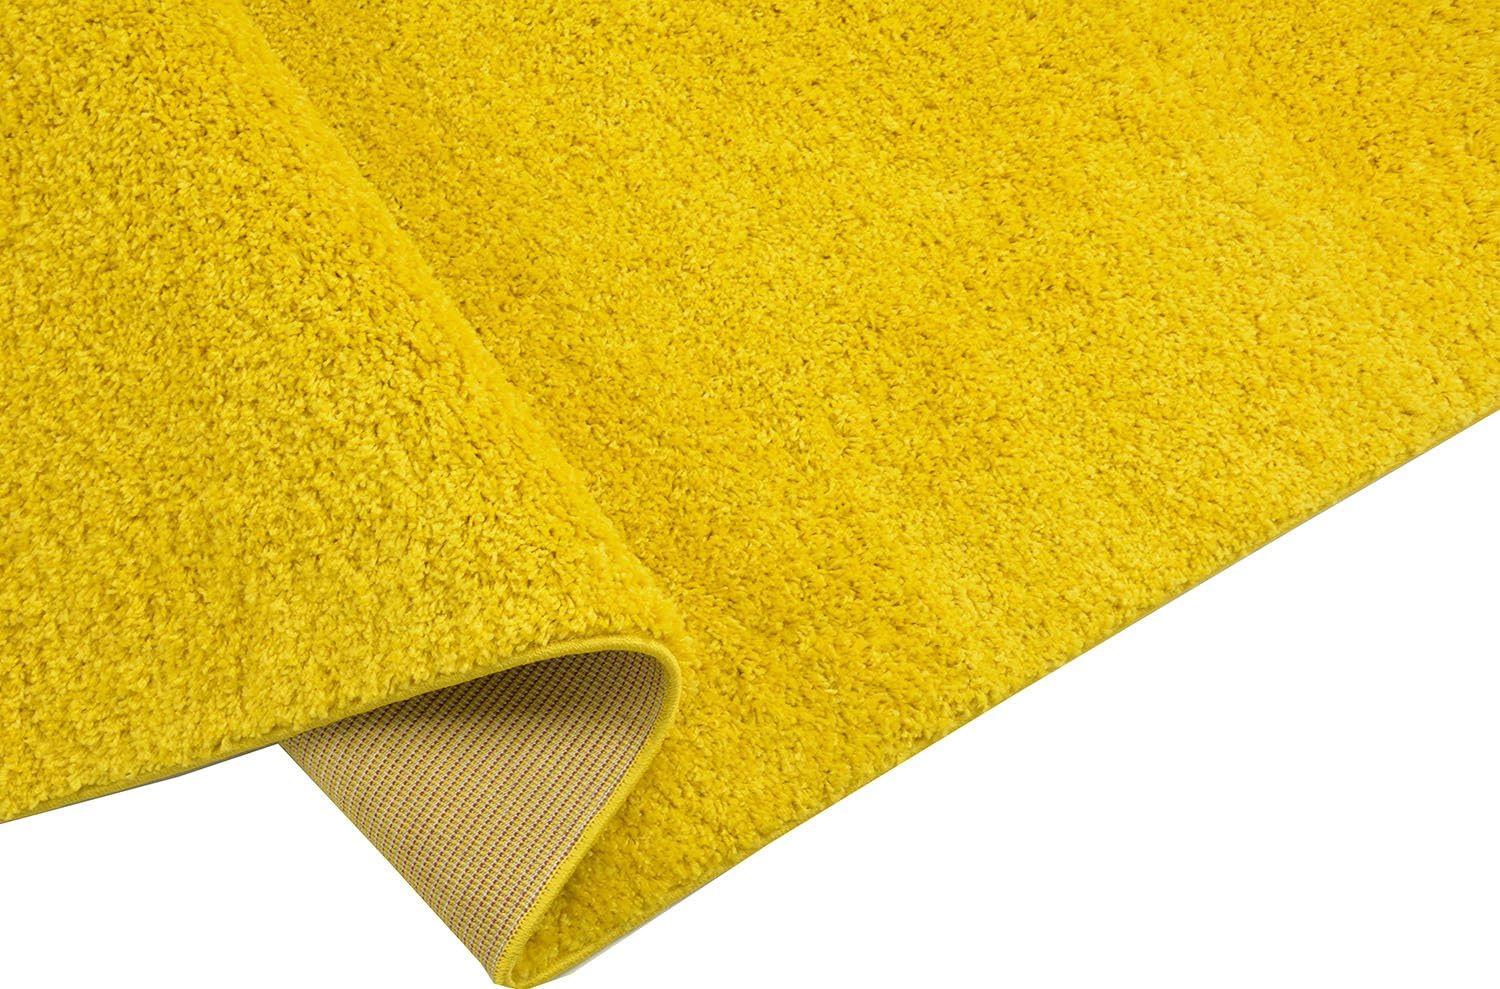 SOHO Shaggy Collection Solid Color Shag Area Rug (Yellow, 5 x 7) - 0